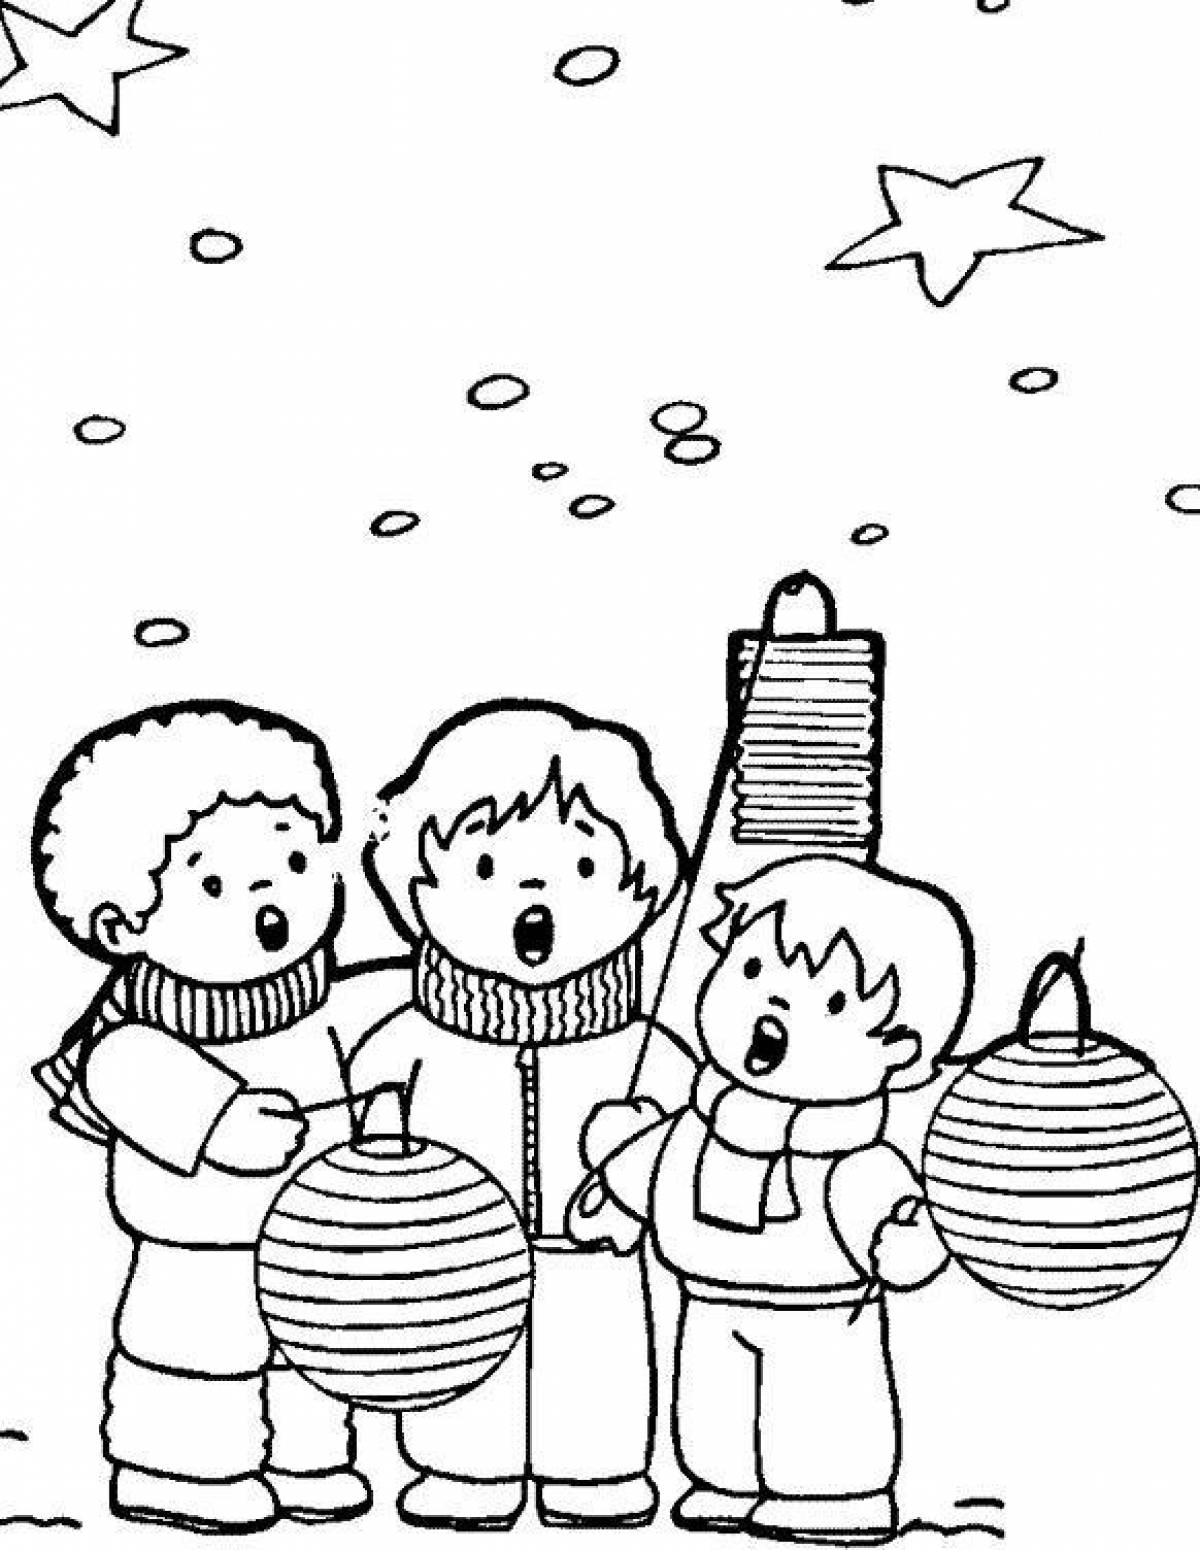 Children's carol coloring pages